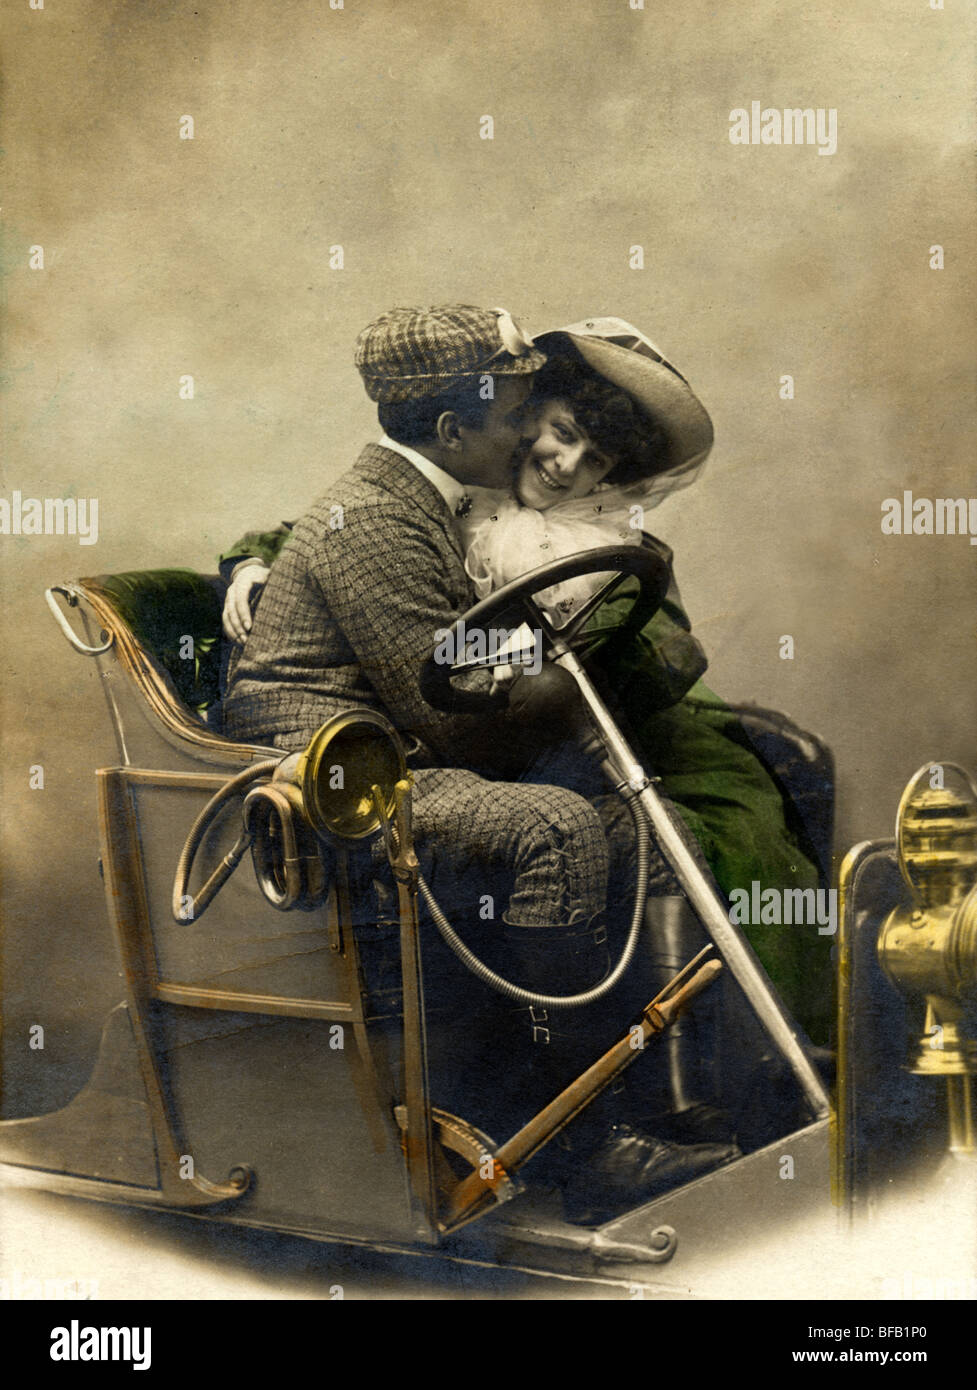 Couple Making Out in Old Roadster Auto Stock Photo